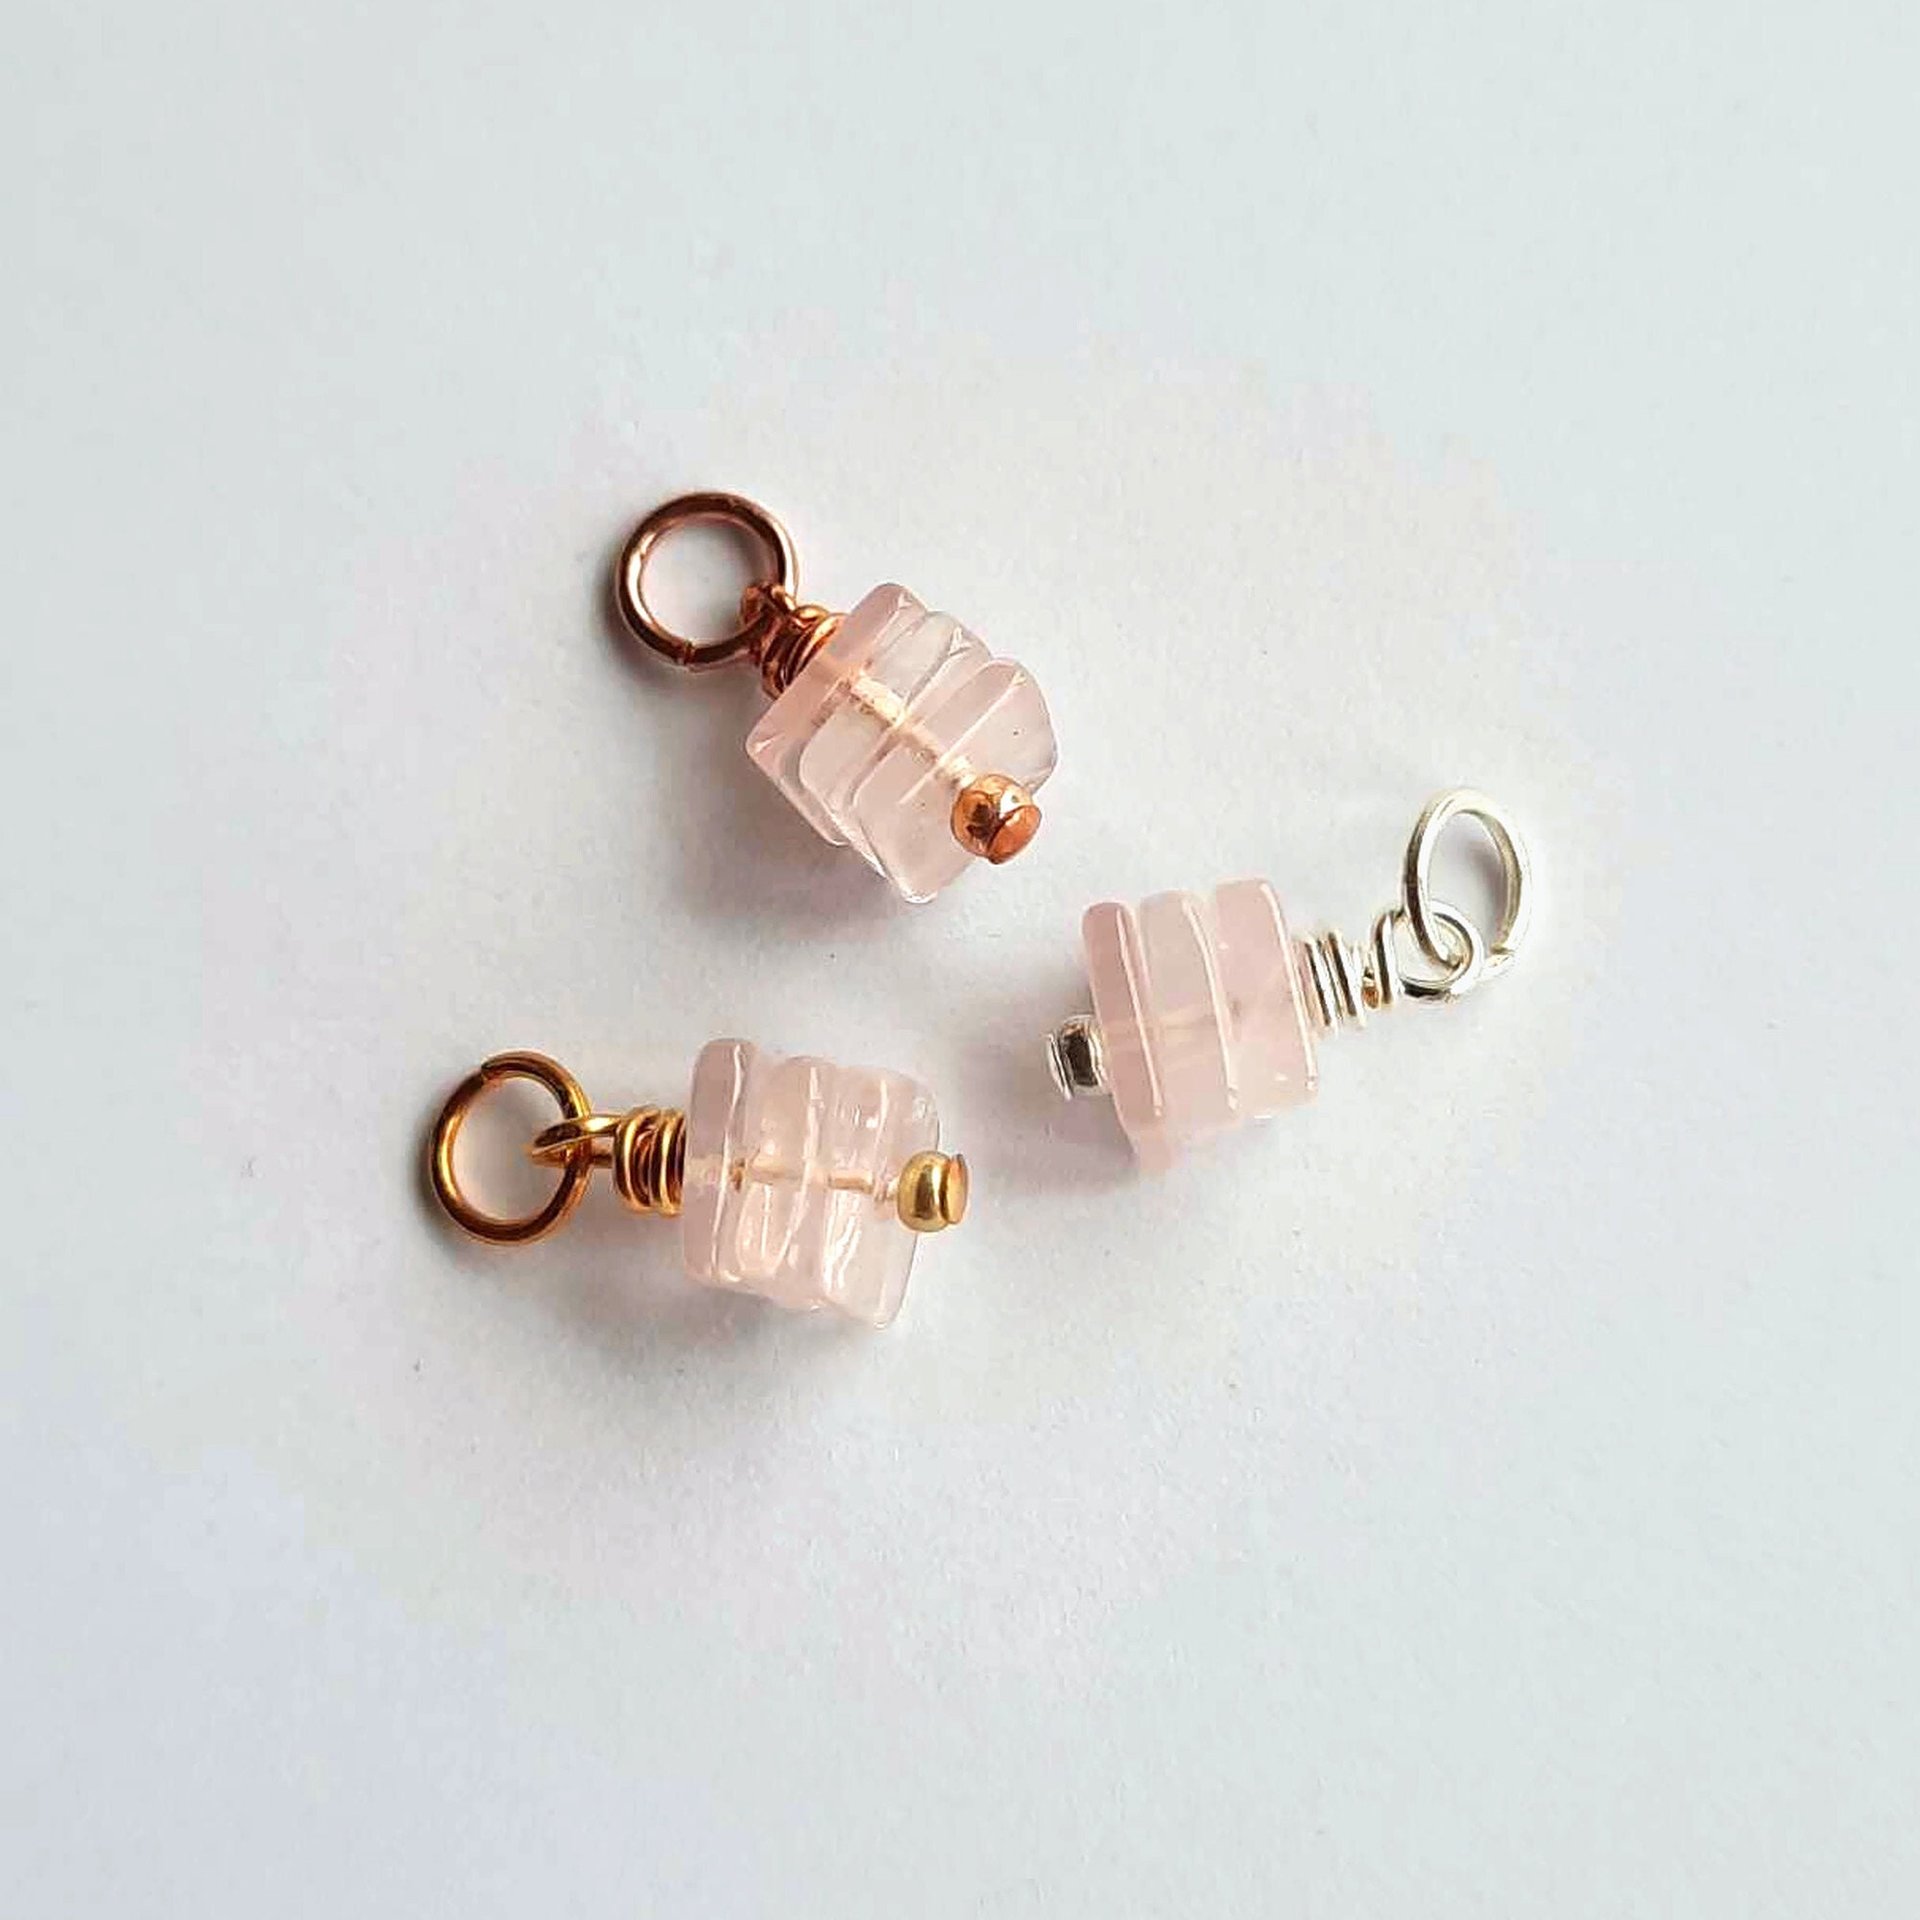 Rose Quartz Square Triple Stack Charm ~ Handmade by The Tiny Tree Frog Jewellery